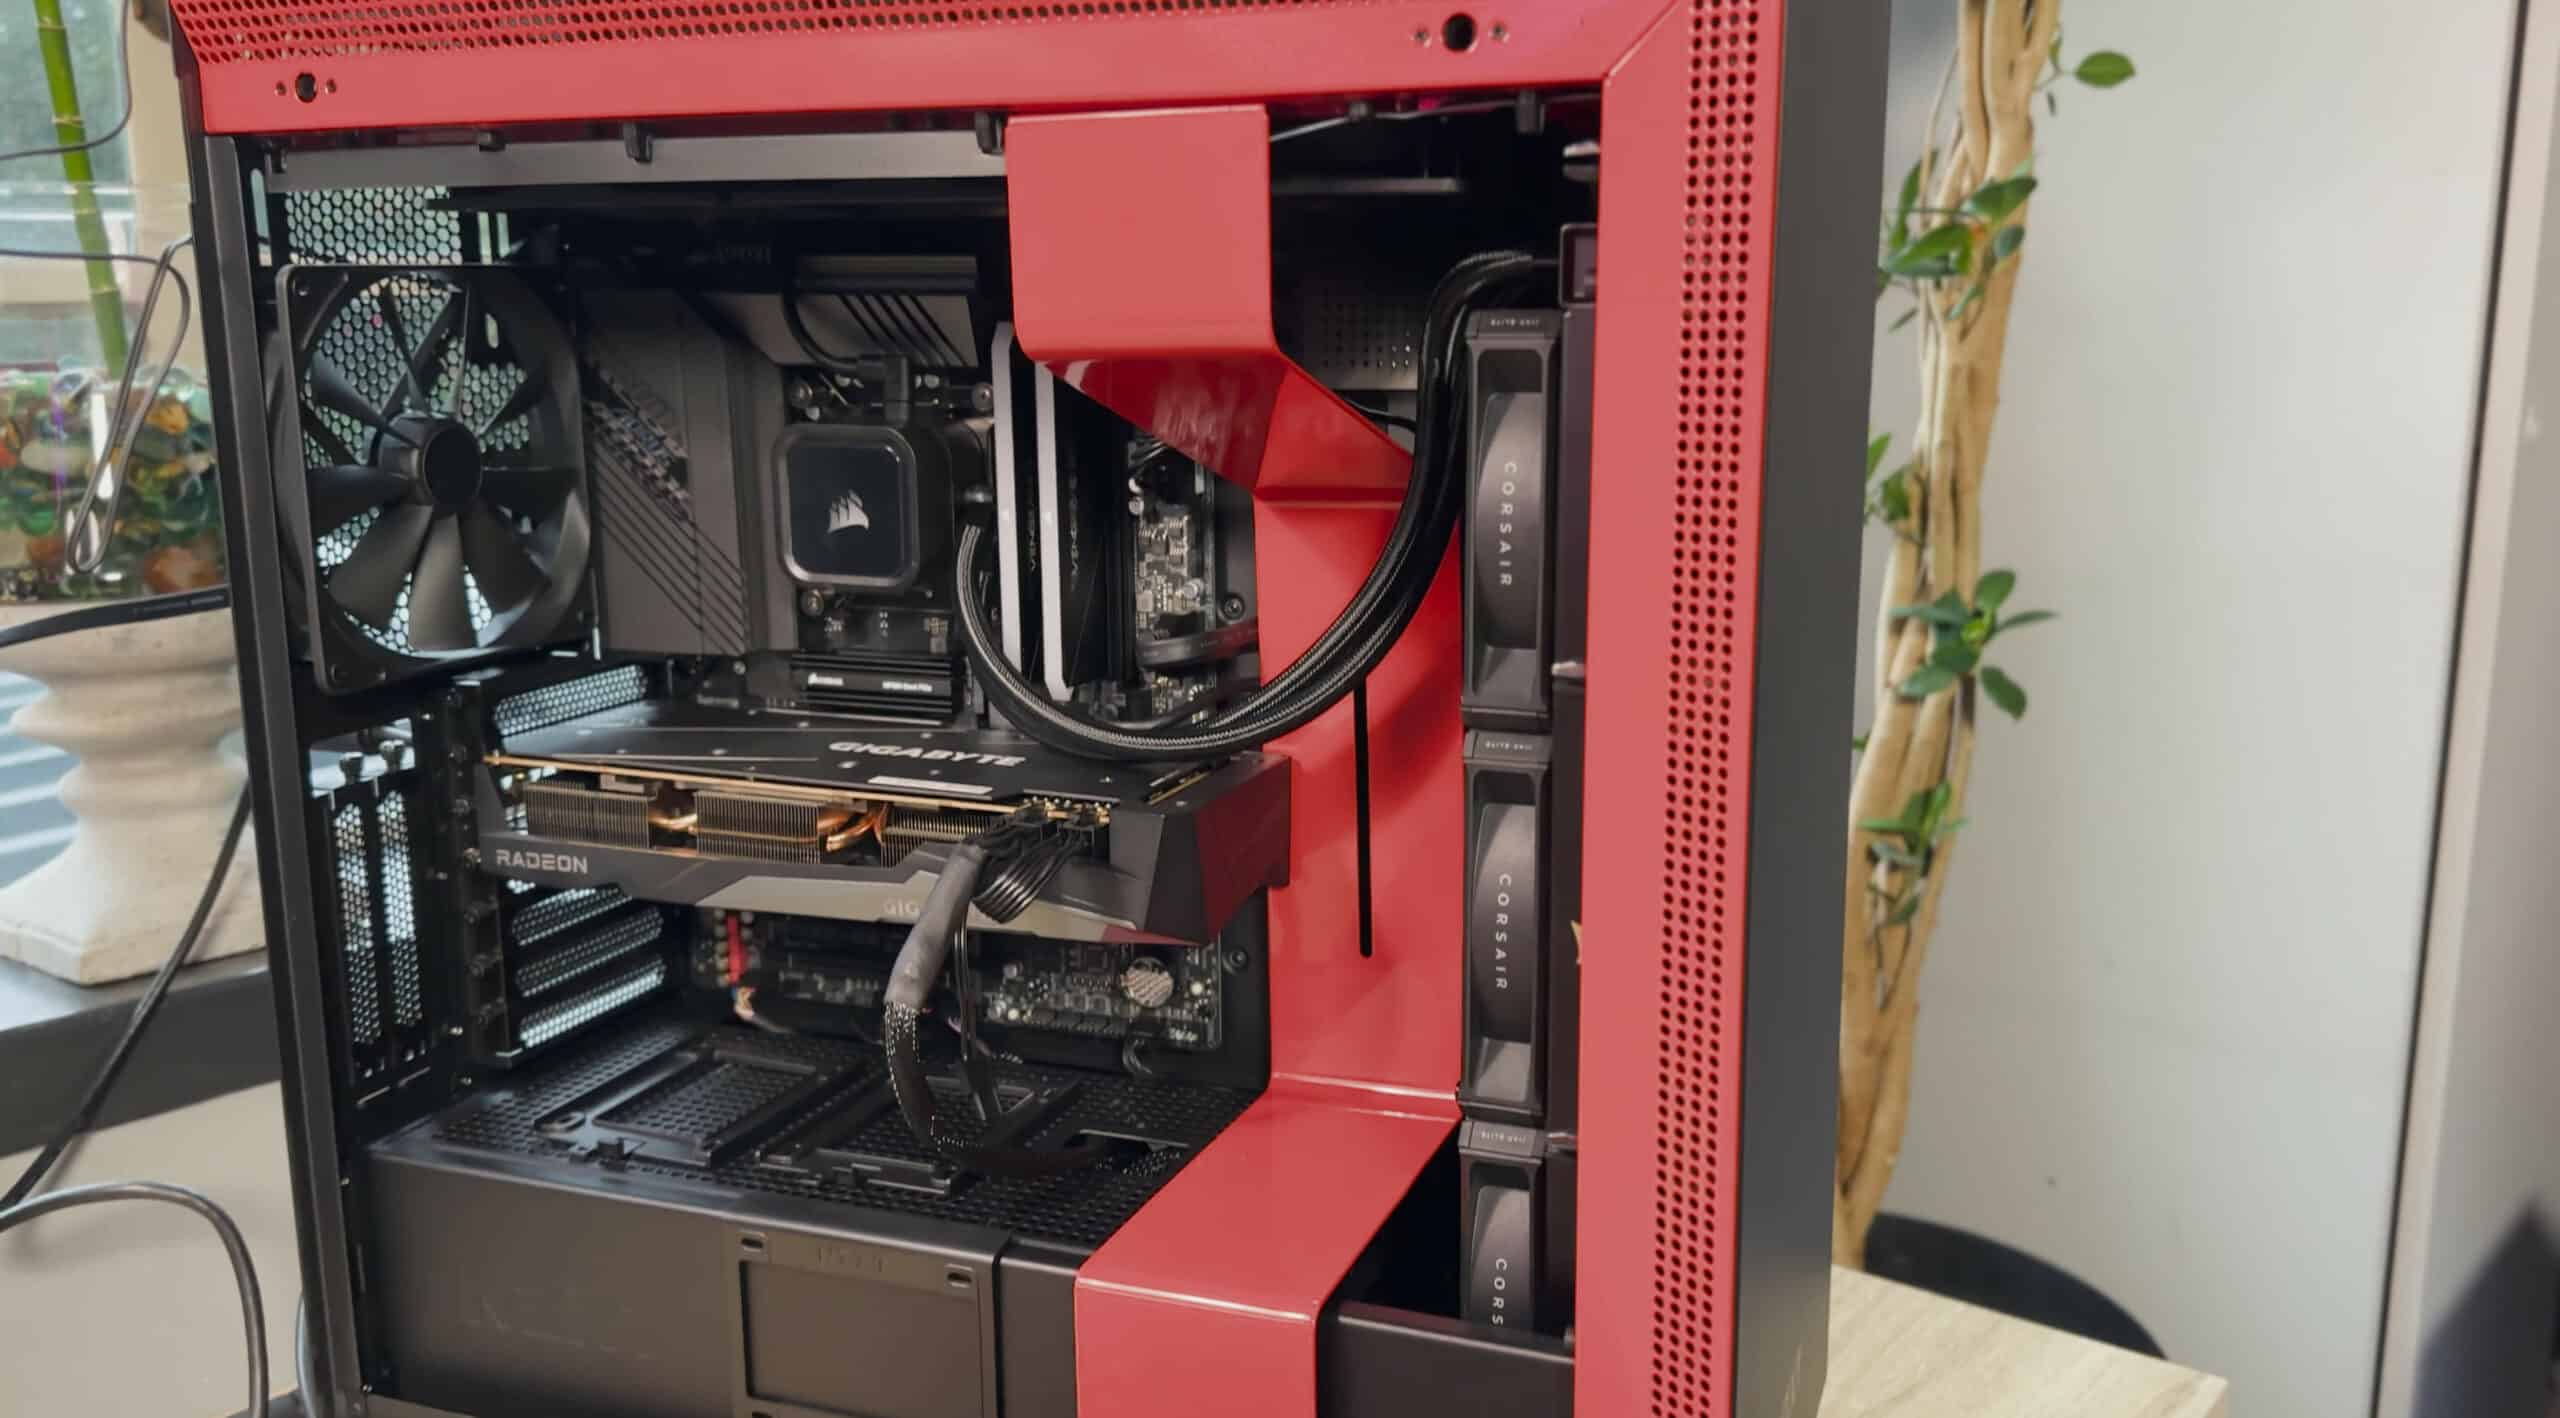 Case - NZXT H710i Black/Red